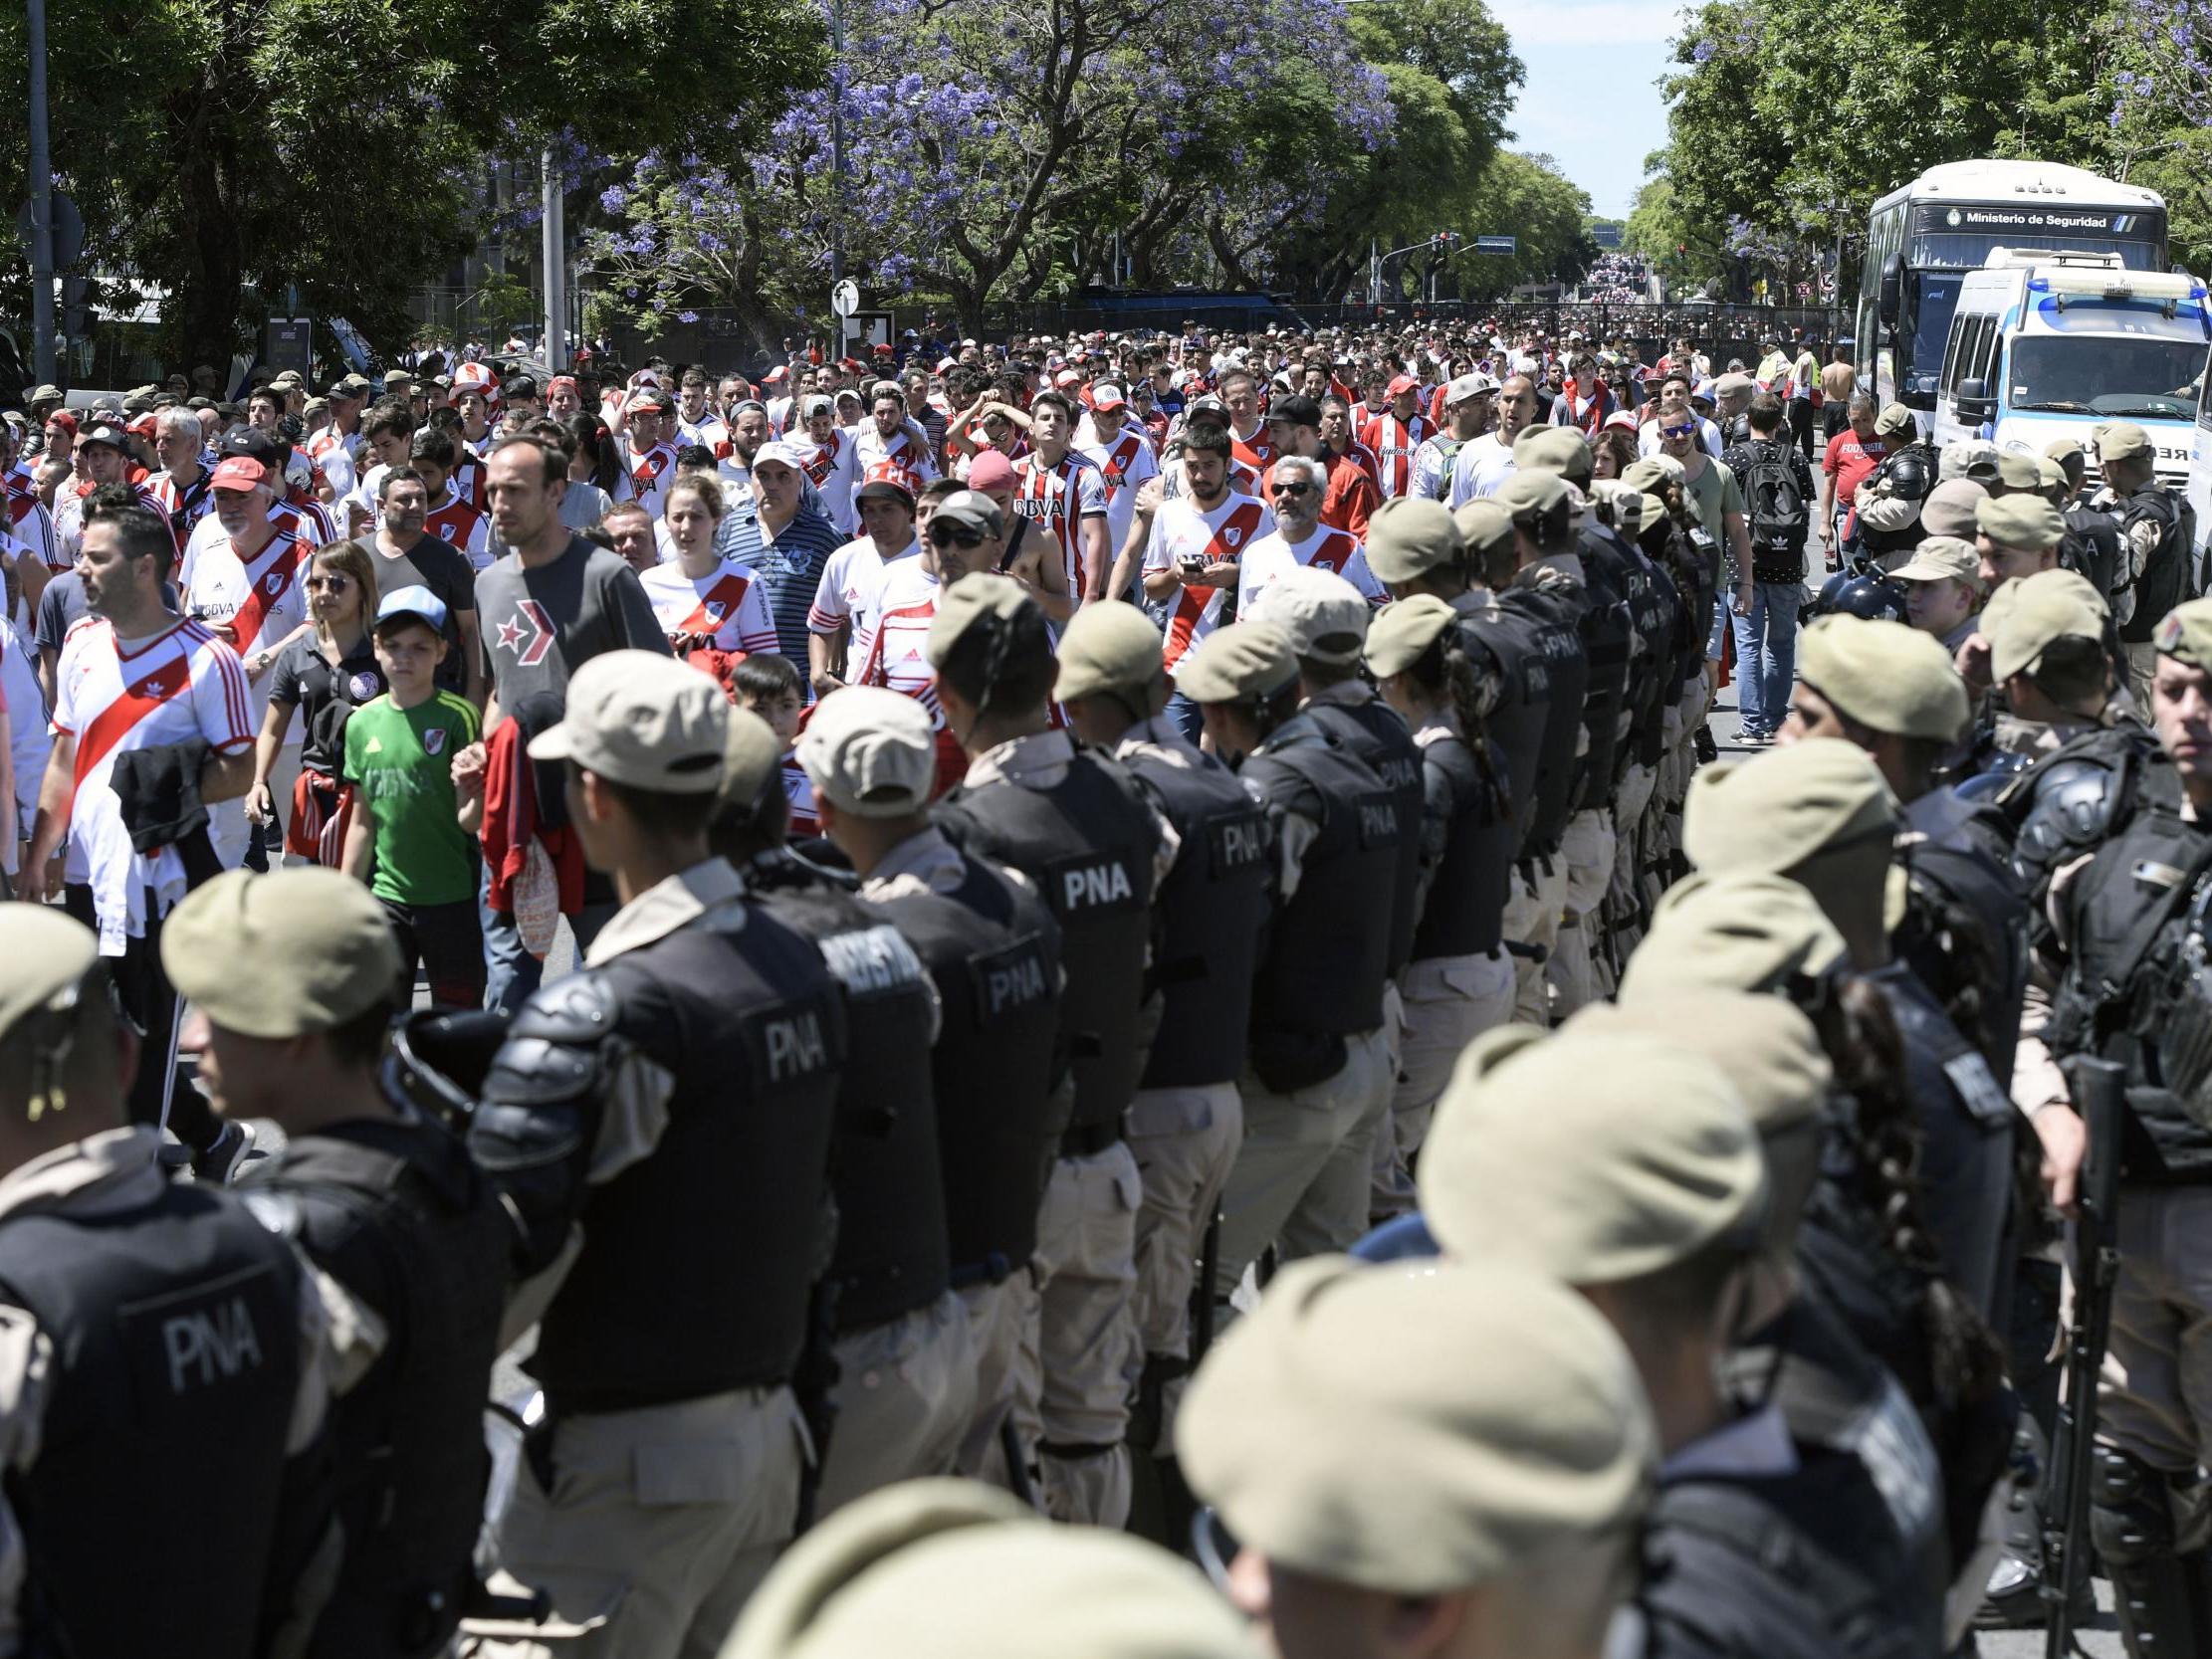 Security forces stand guard as River's supporters leave Estadio Monumental